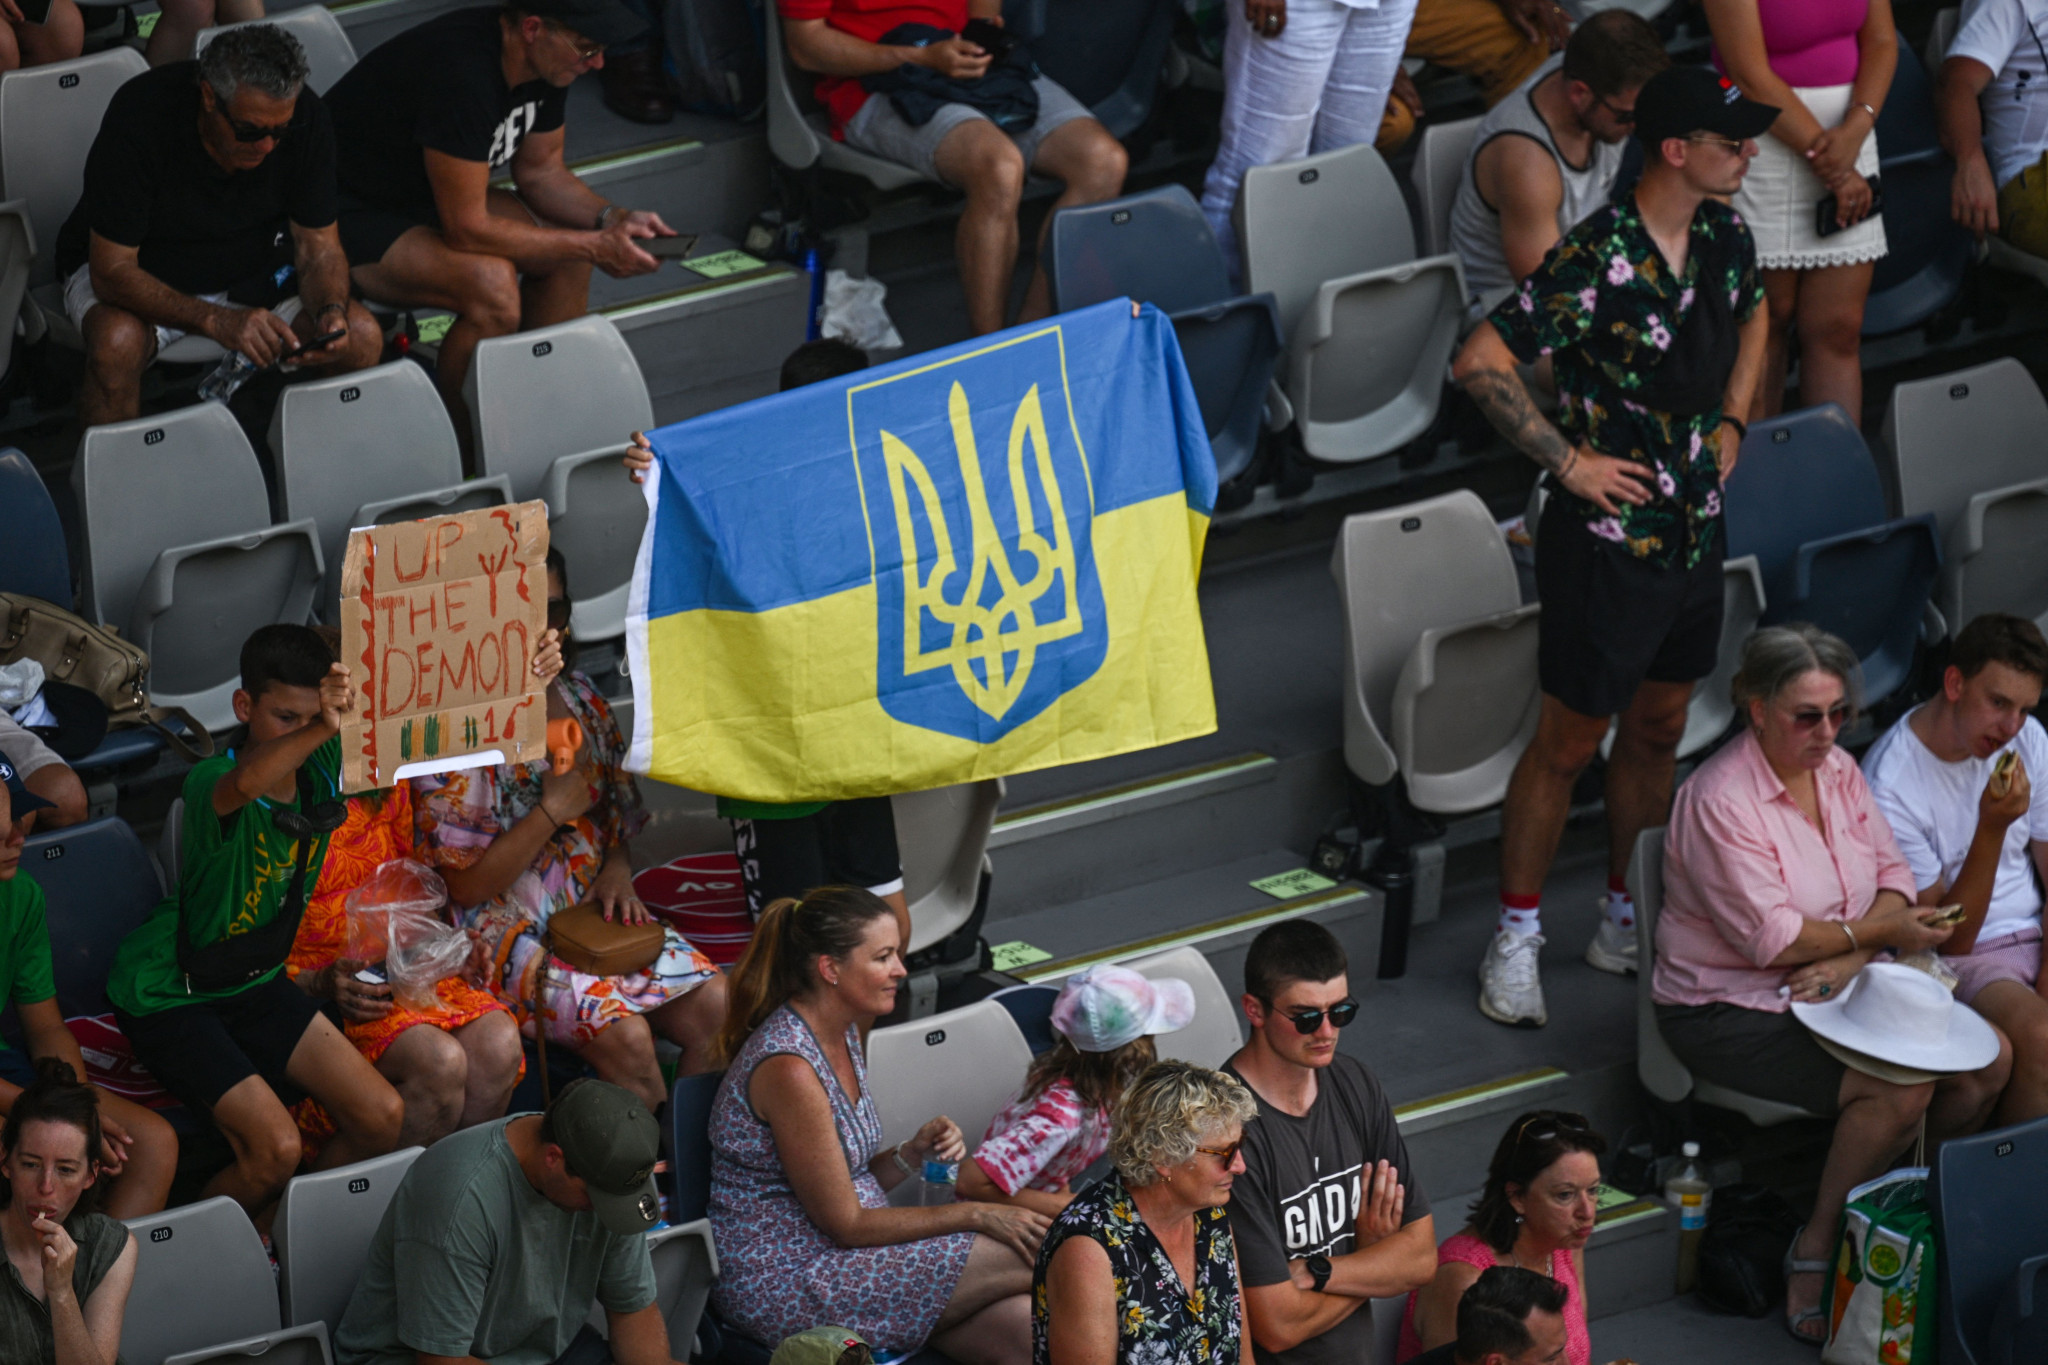 A Ukrainian flag was pictured during the first-round match between Andrey Rublev of Russia, competing as a neutral, and Austria's Dominic Thiem ©Getty Images